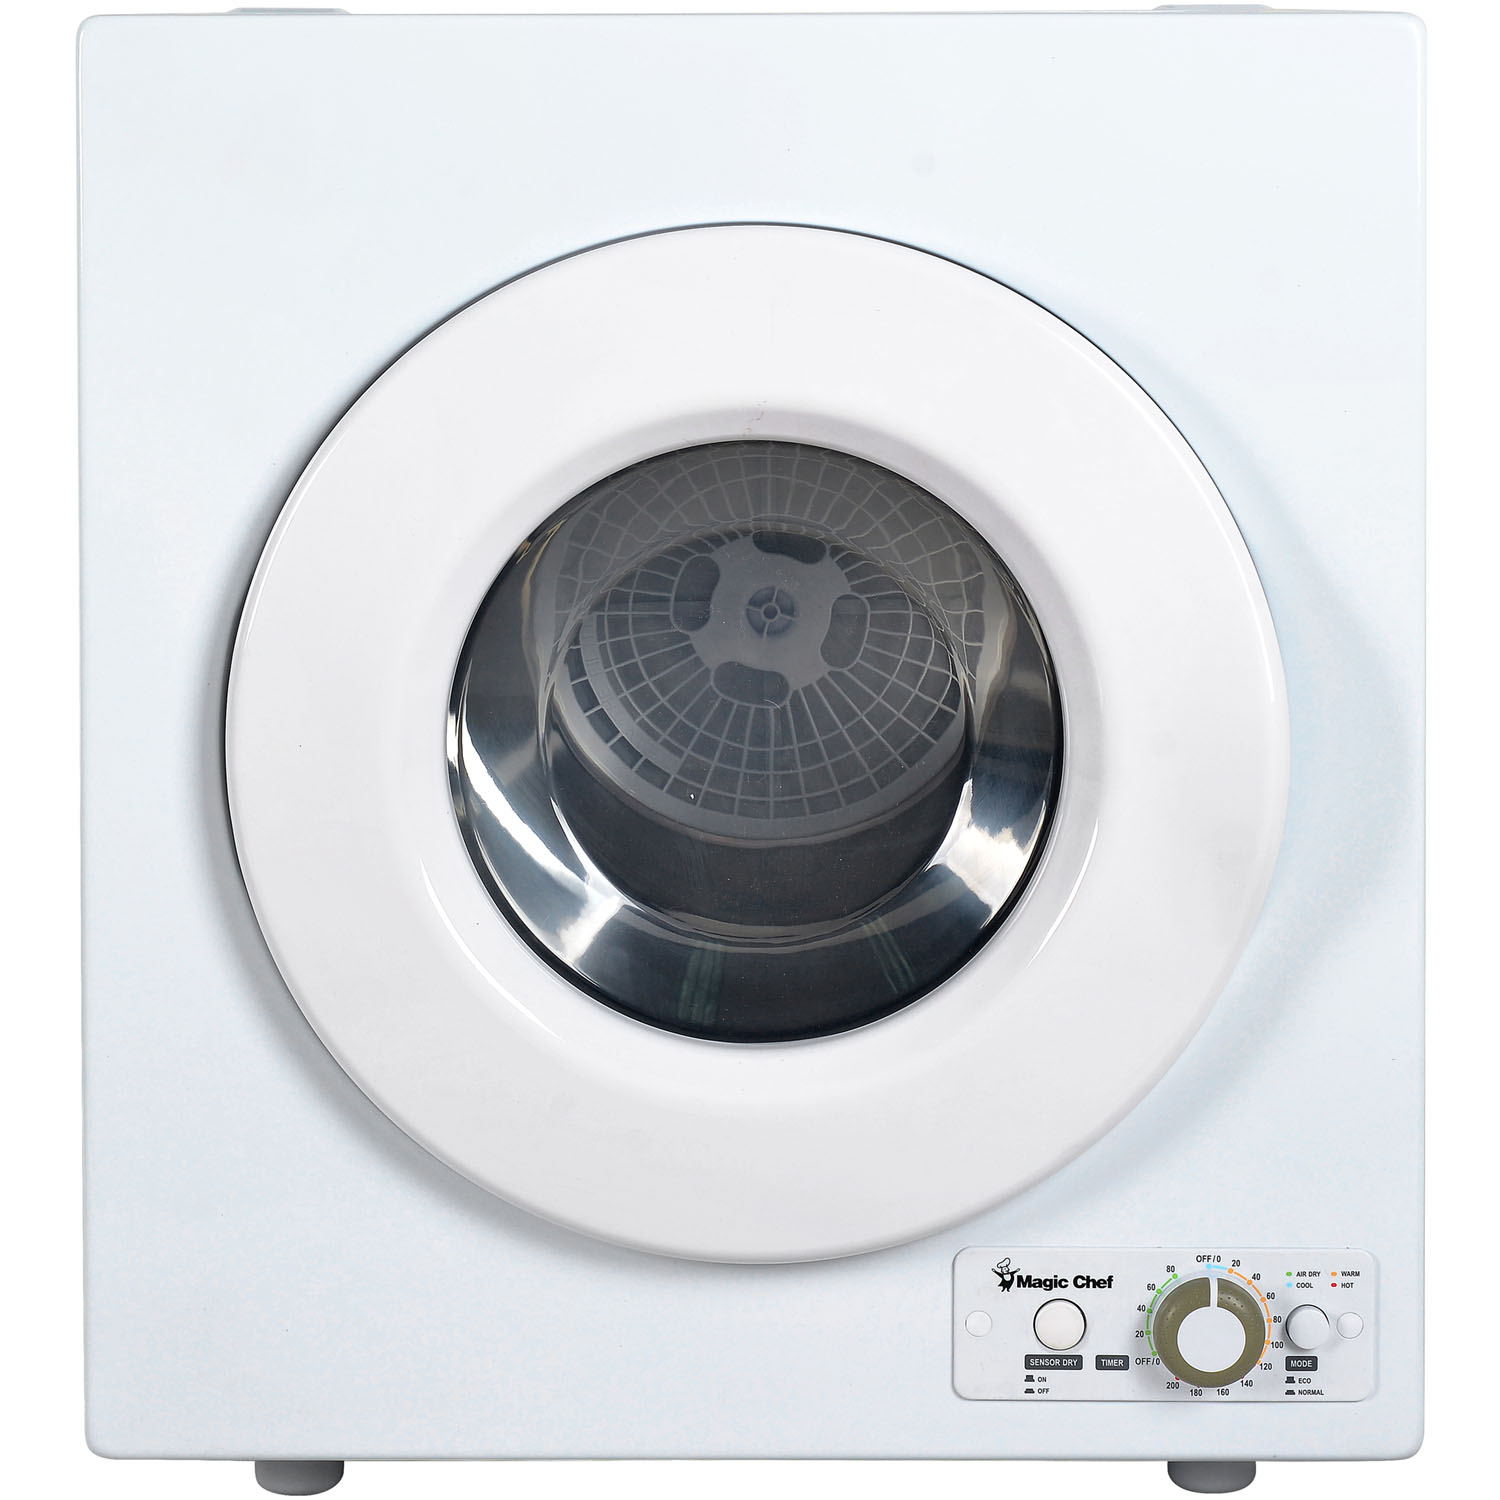 Magic Chef Brand 2.6 Cu. ft. Electric Dryer in White, 17.5 in D, 27.5 in H, 23.6 in L, 48.4 lbs. - image 1 of 9